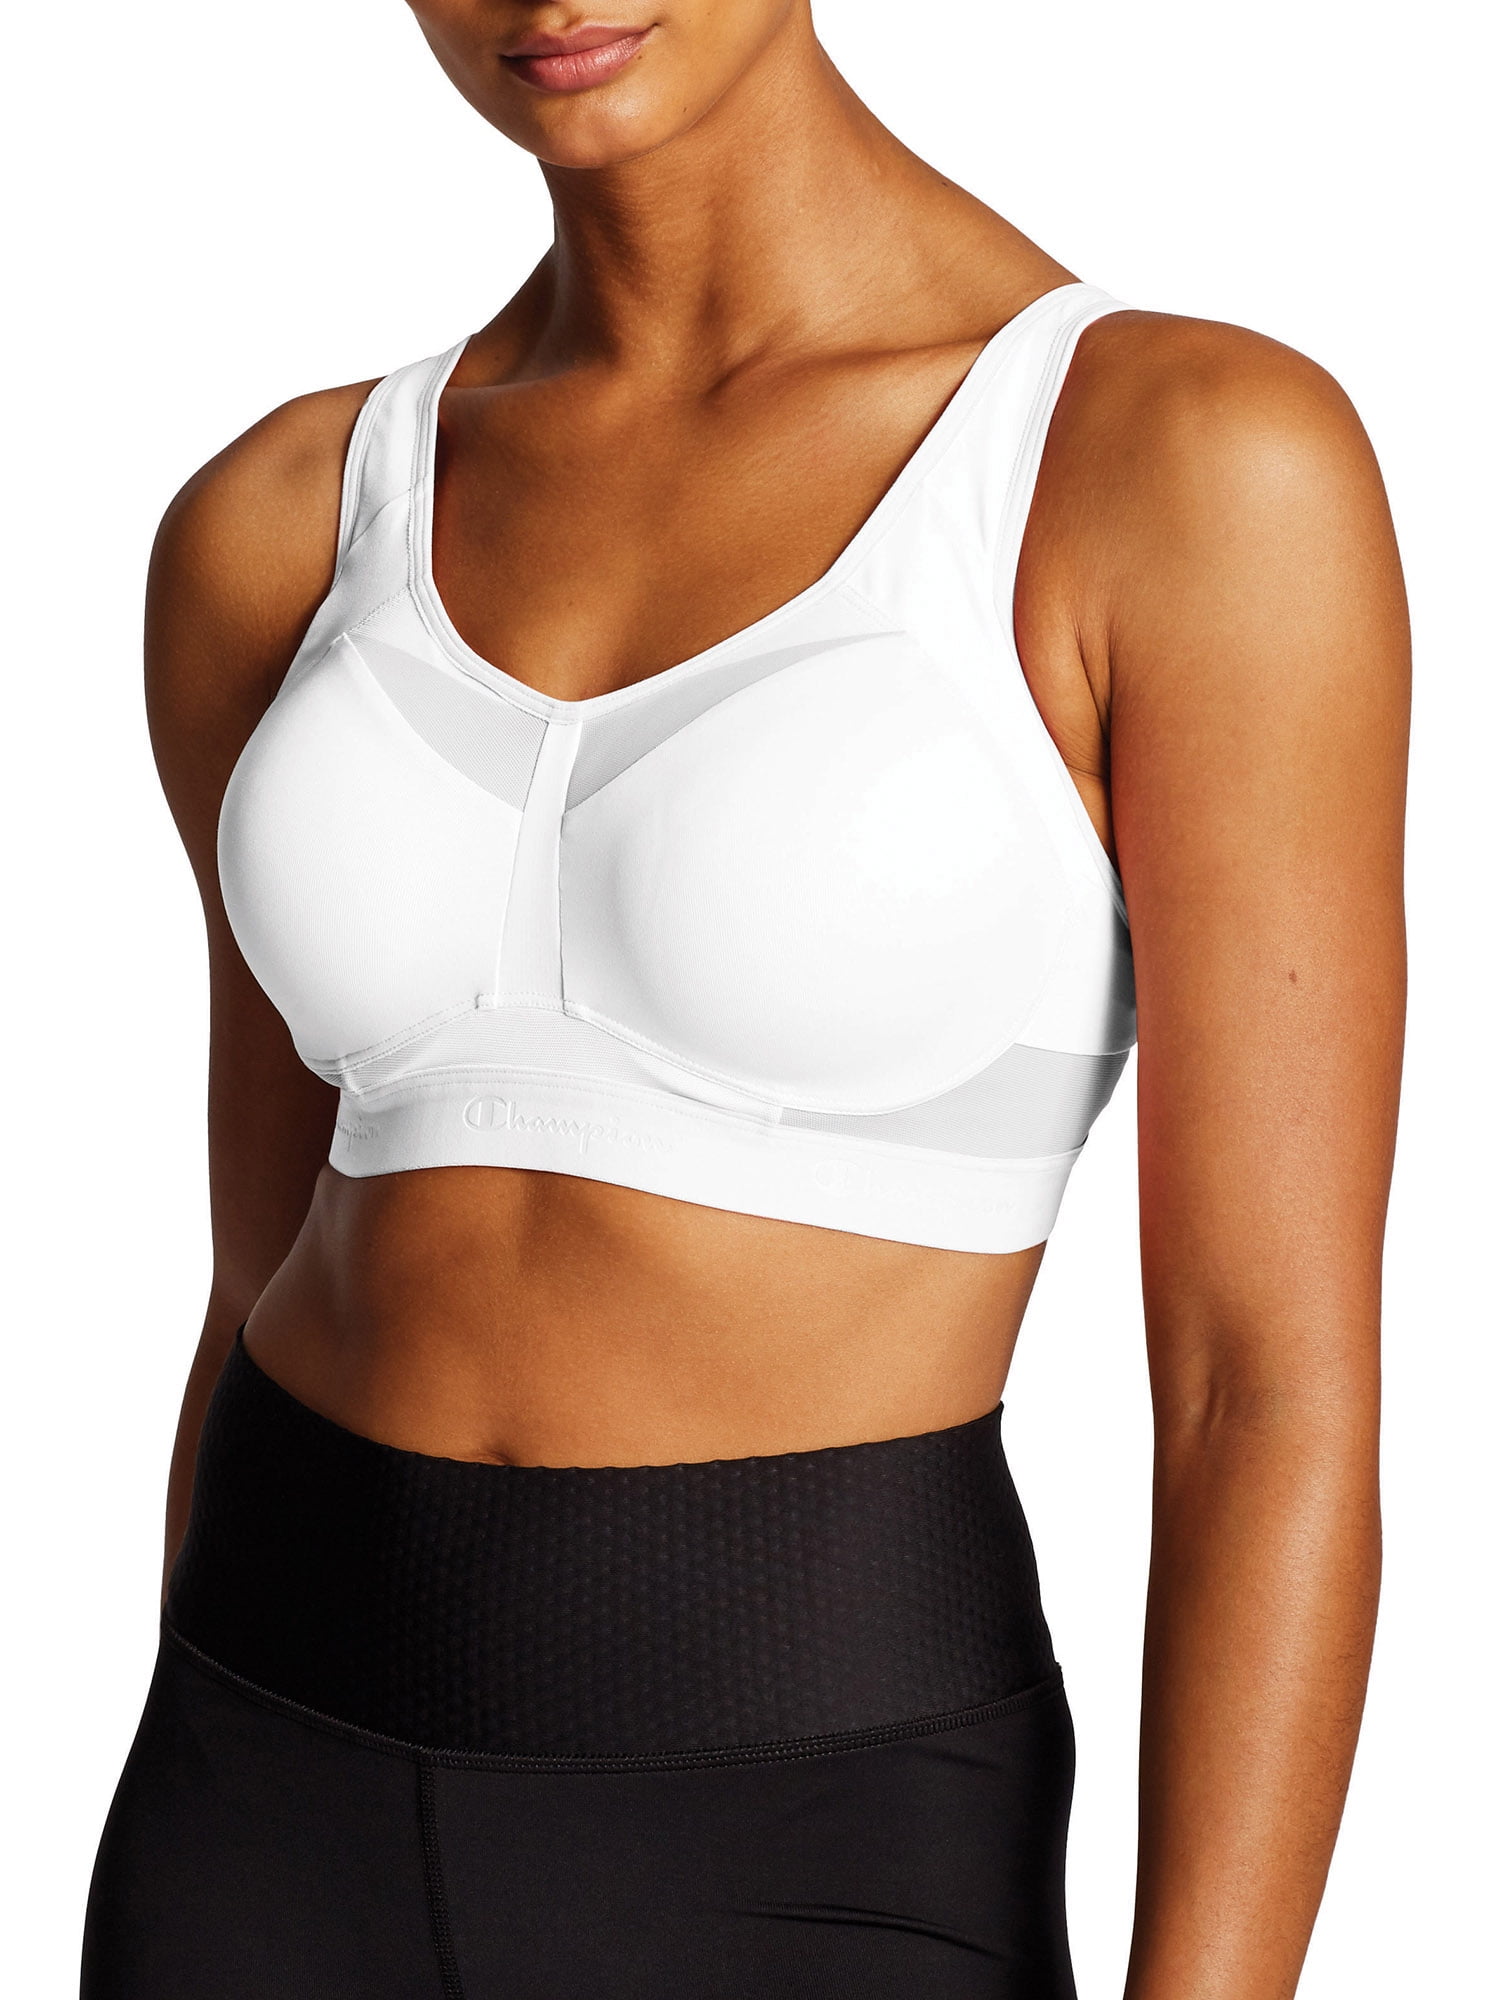 Champion Sports Bra Motion Control Underwire Double Dry Maximum Support Stretch